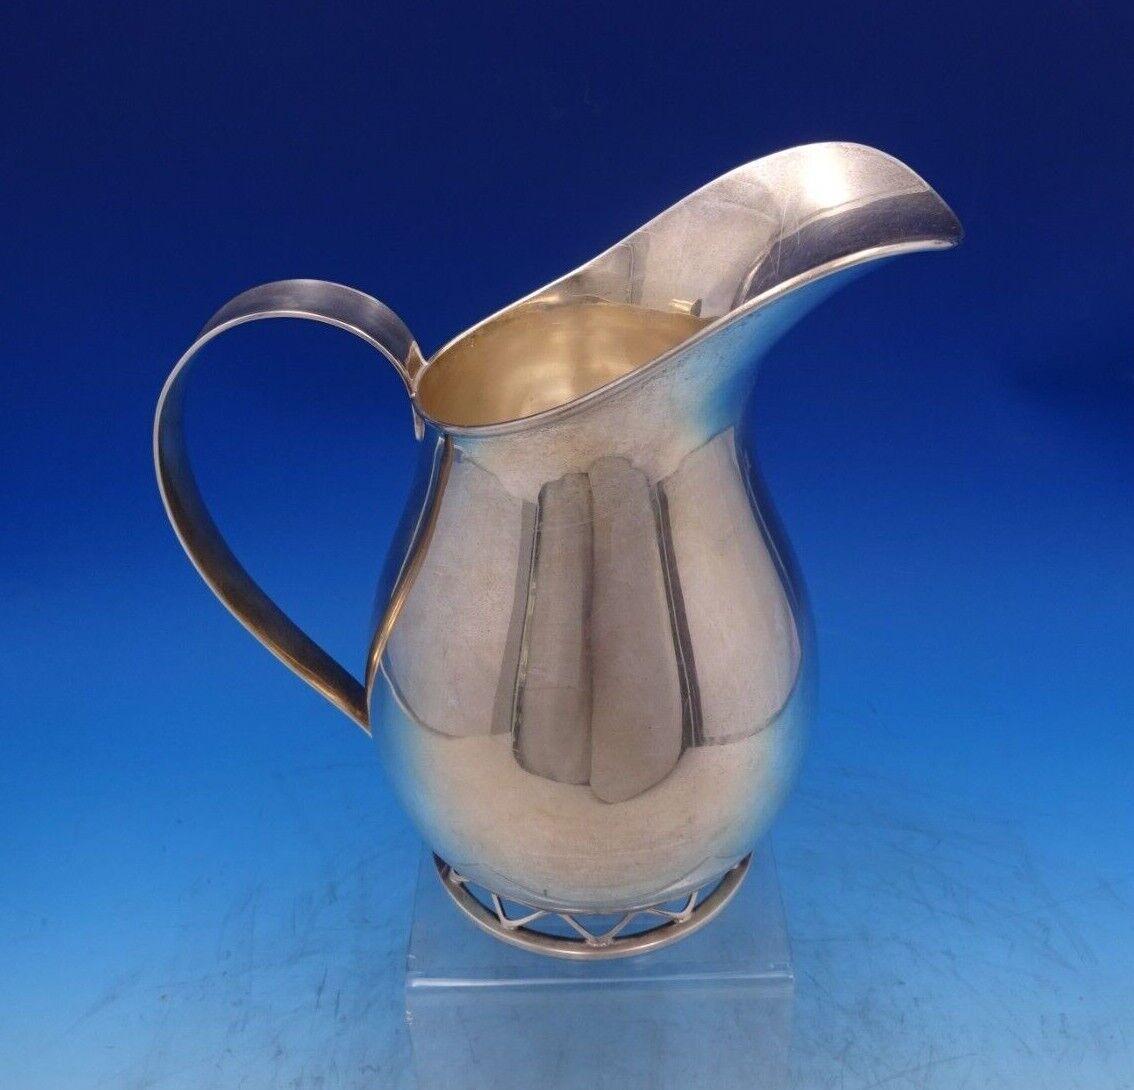 Allan Adler

Marvelous Allan Adler sterling silver Mid-Century Modern water pitcher with pierced base. This pitcher measures 9